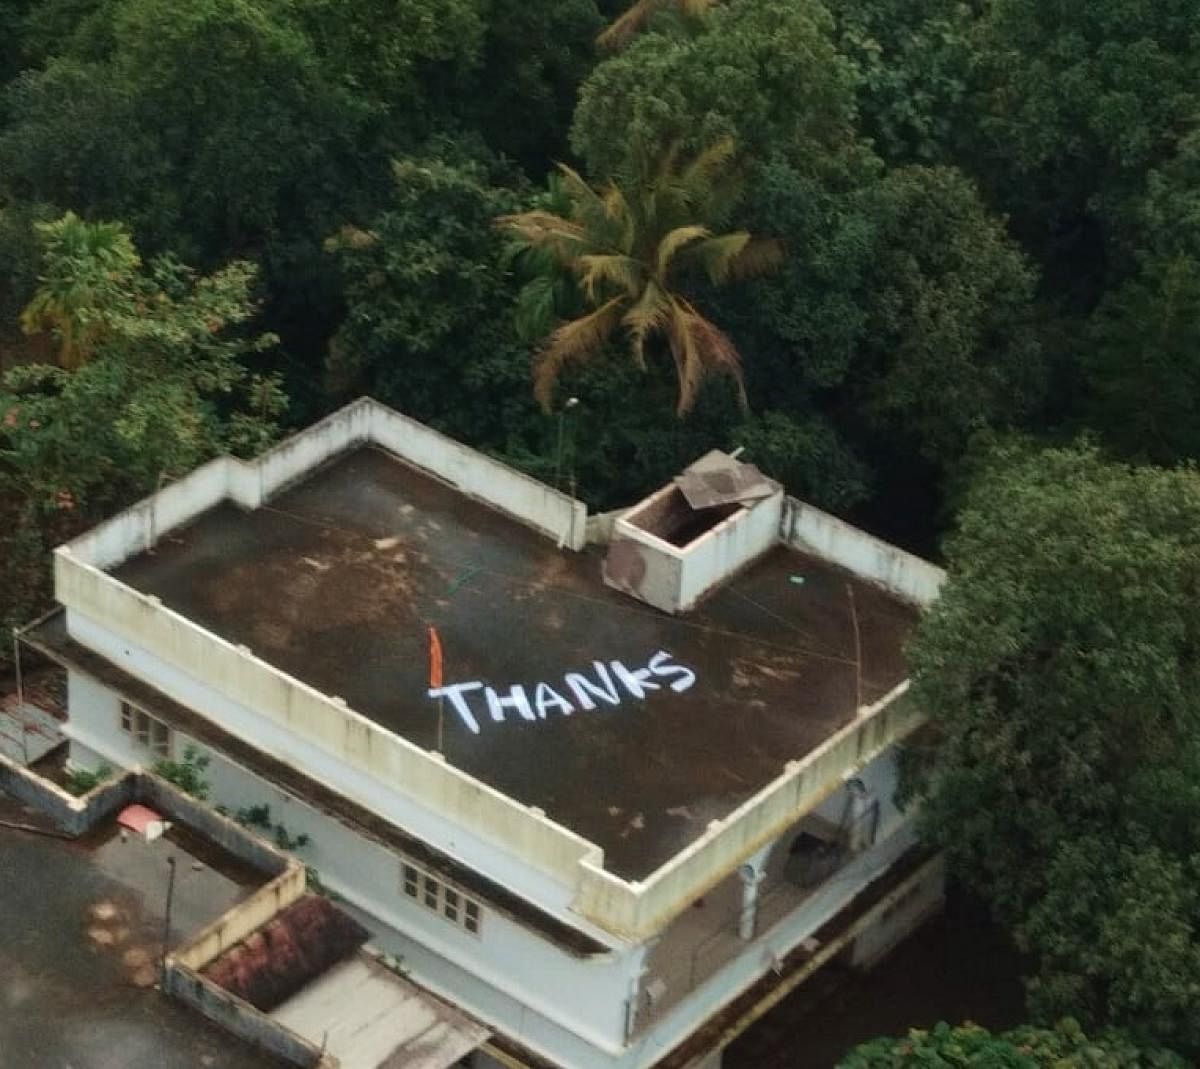 From the rooftop, a thank you note that says it all